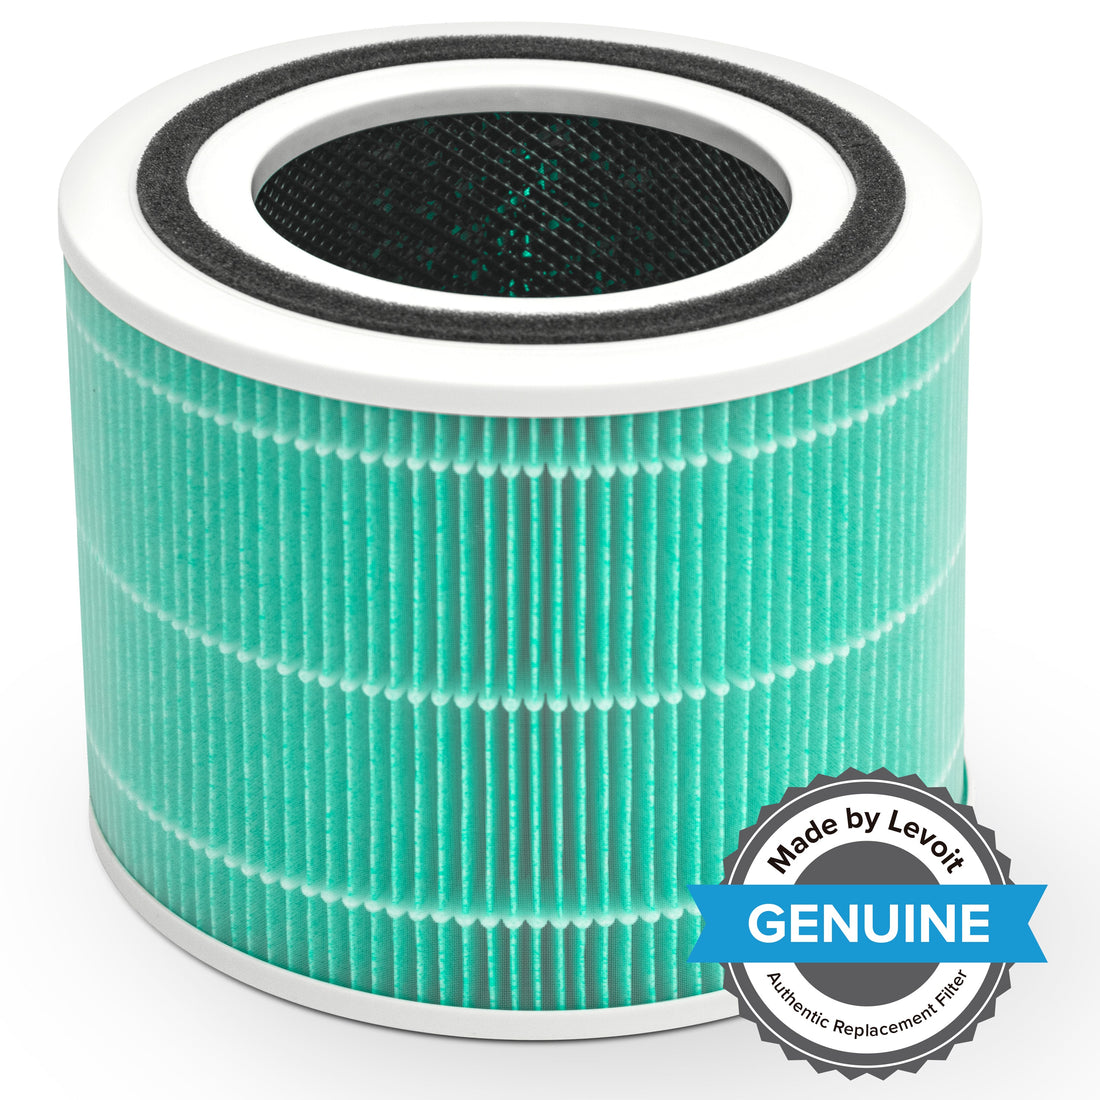 LEVOIT Core 300 Air Purifier 3-in-1 True HEPA Toxin Absorber Replacement Filter